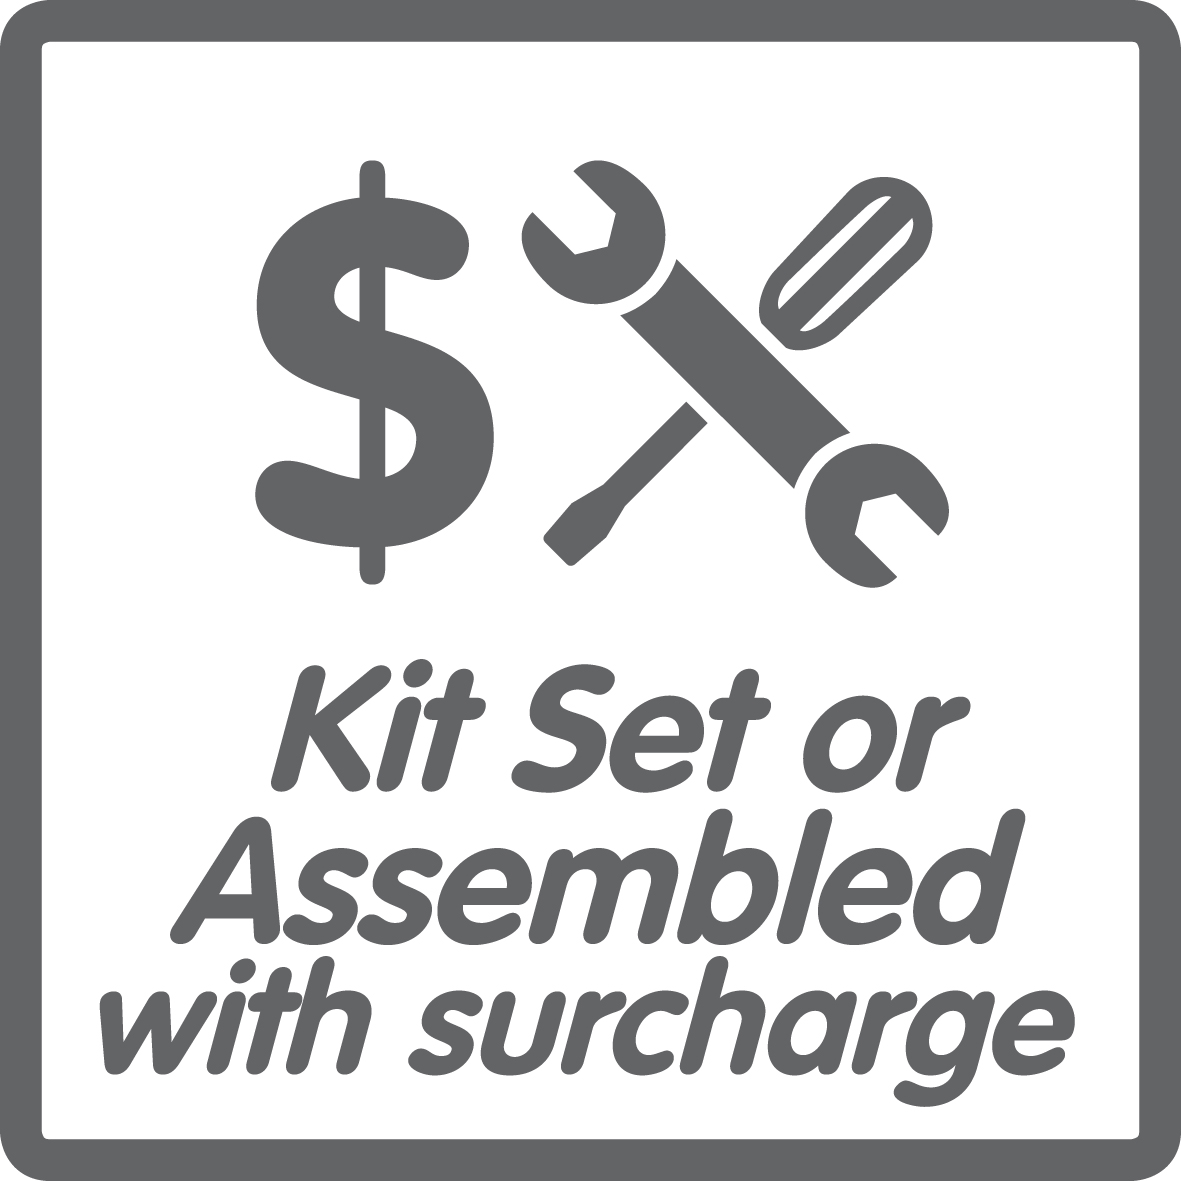 This product has a kitset assembly surcharge